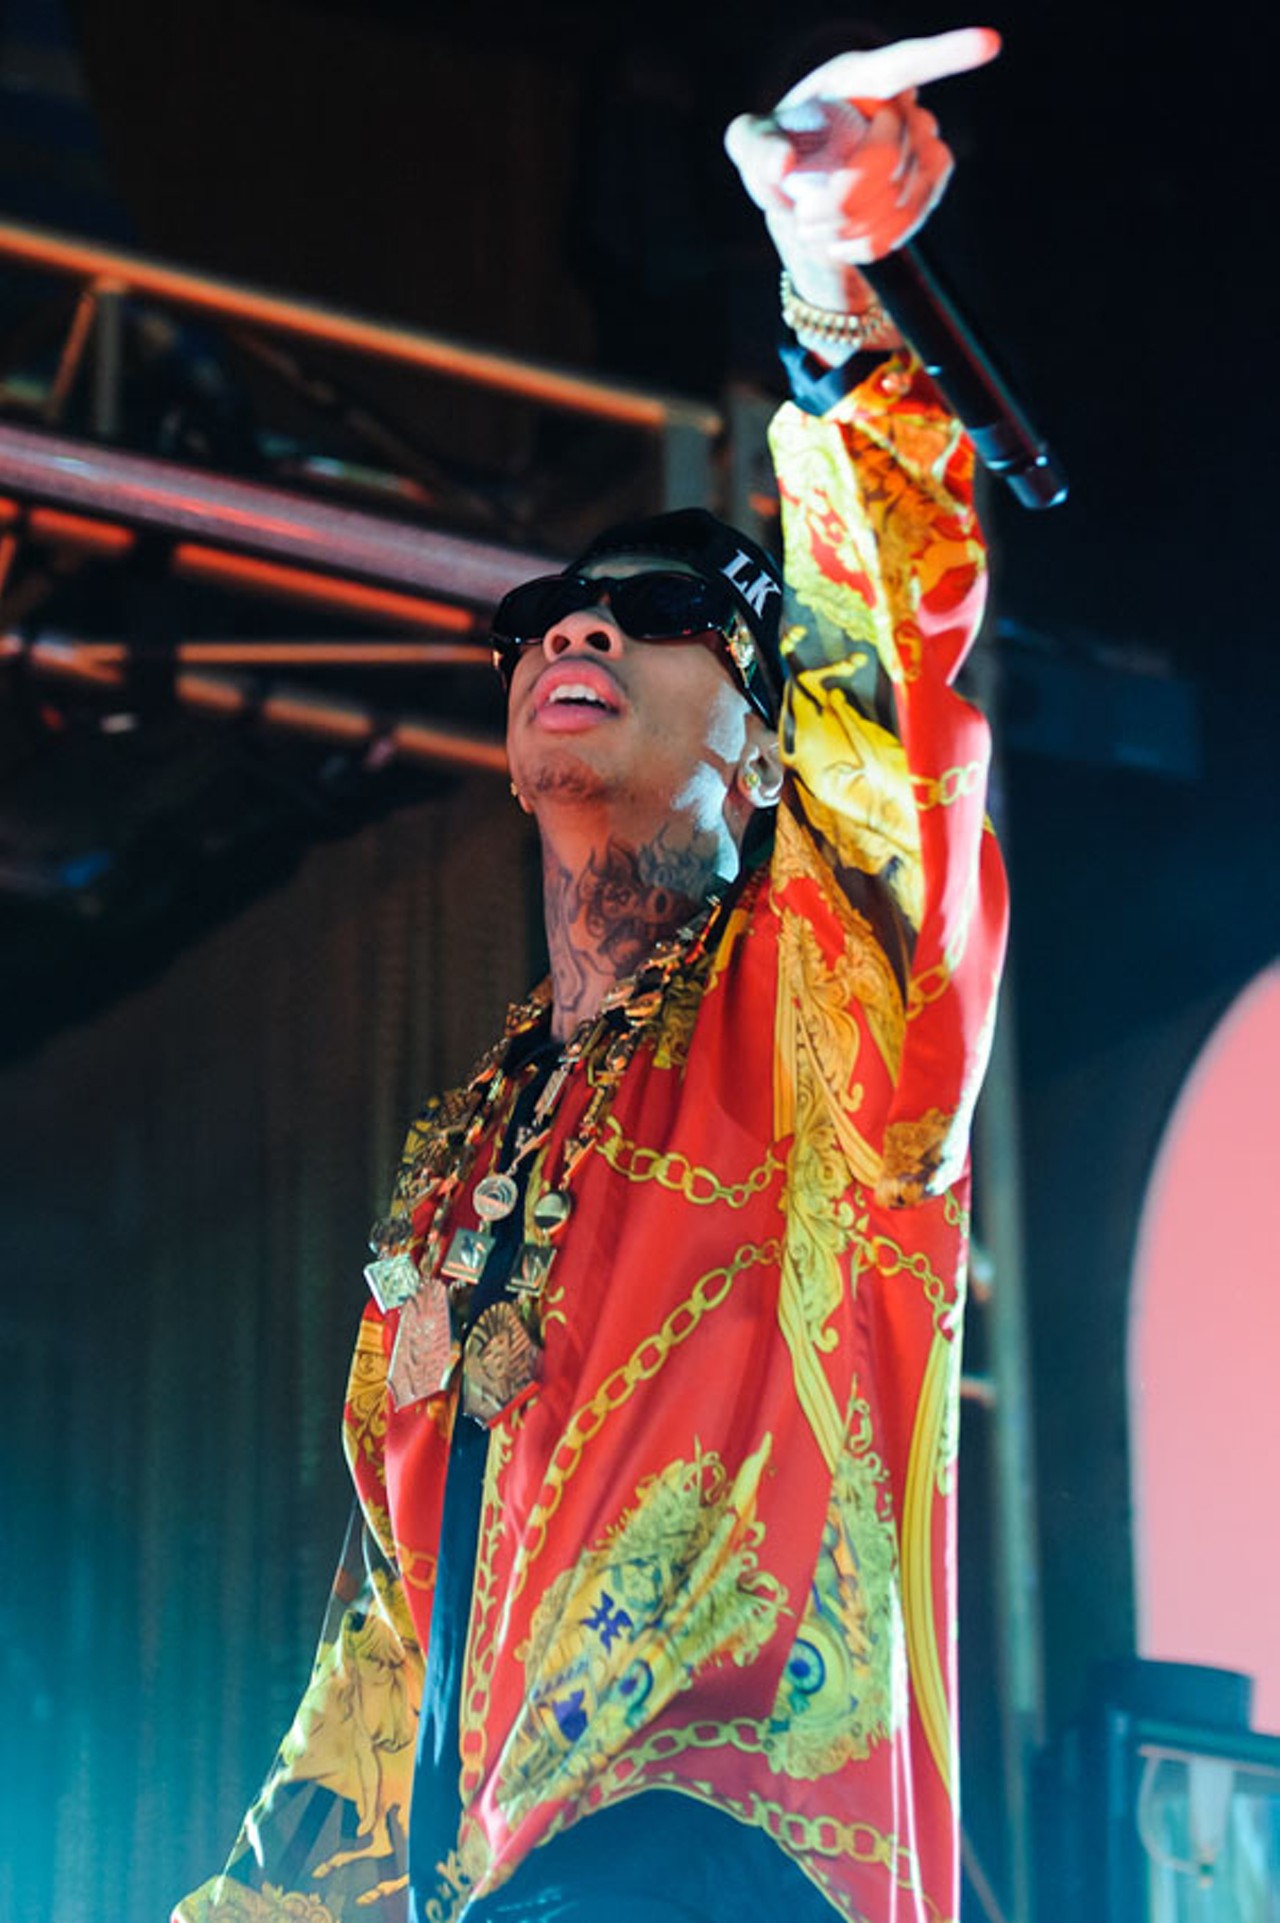 Sunglasses at night? Of course, if you're TYGA.